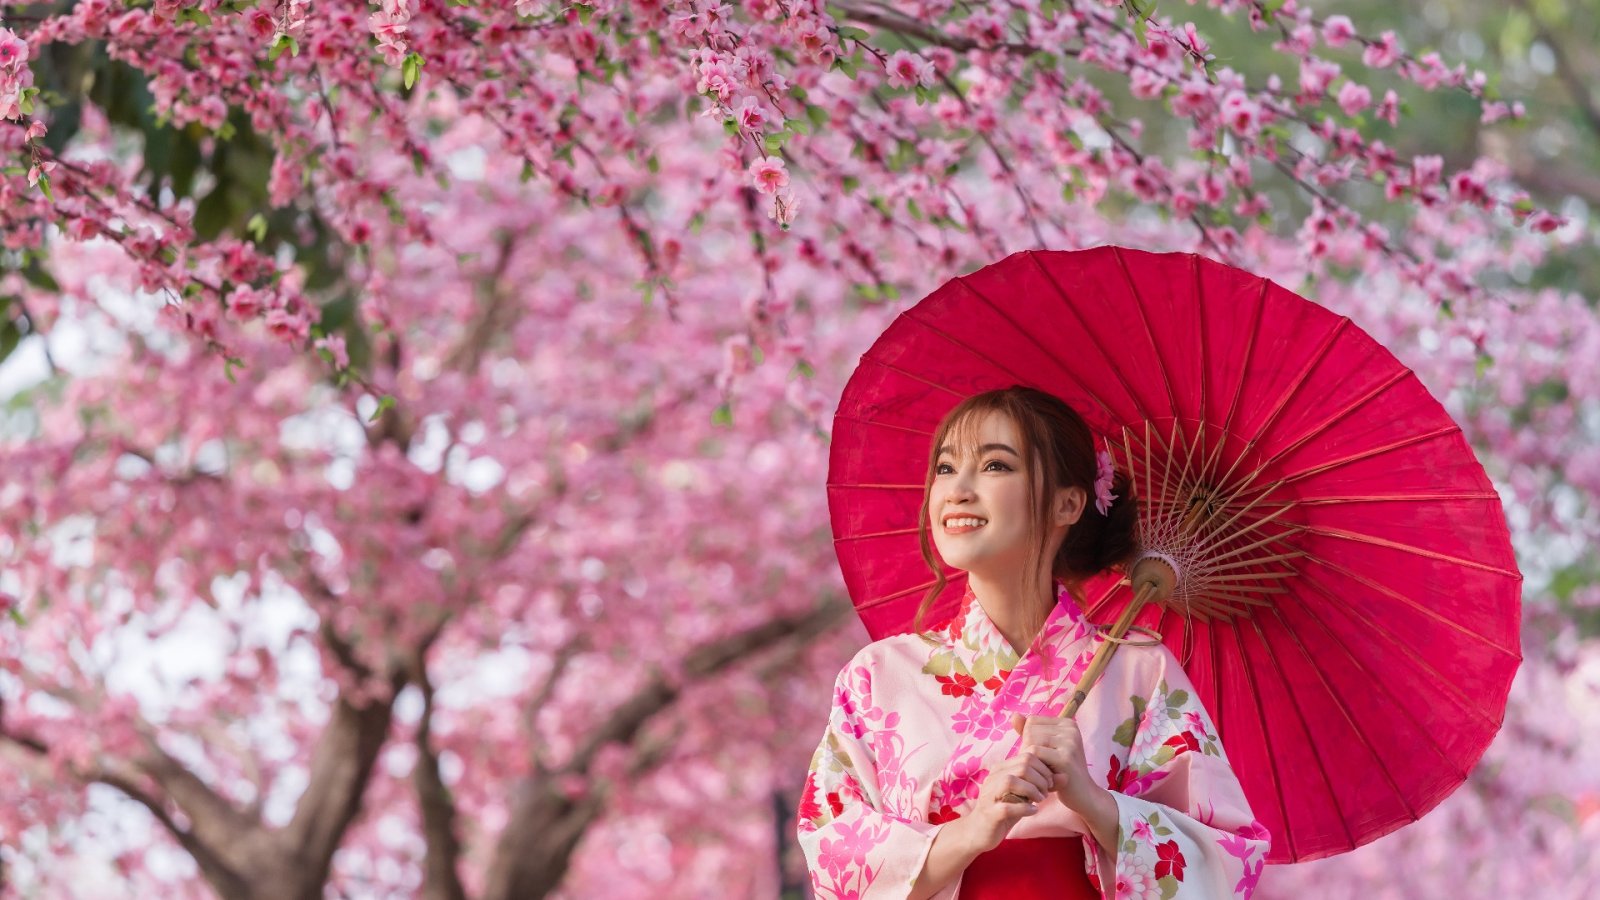 How and where to indulge in the splendor of cherry blossom season